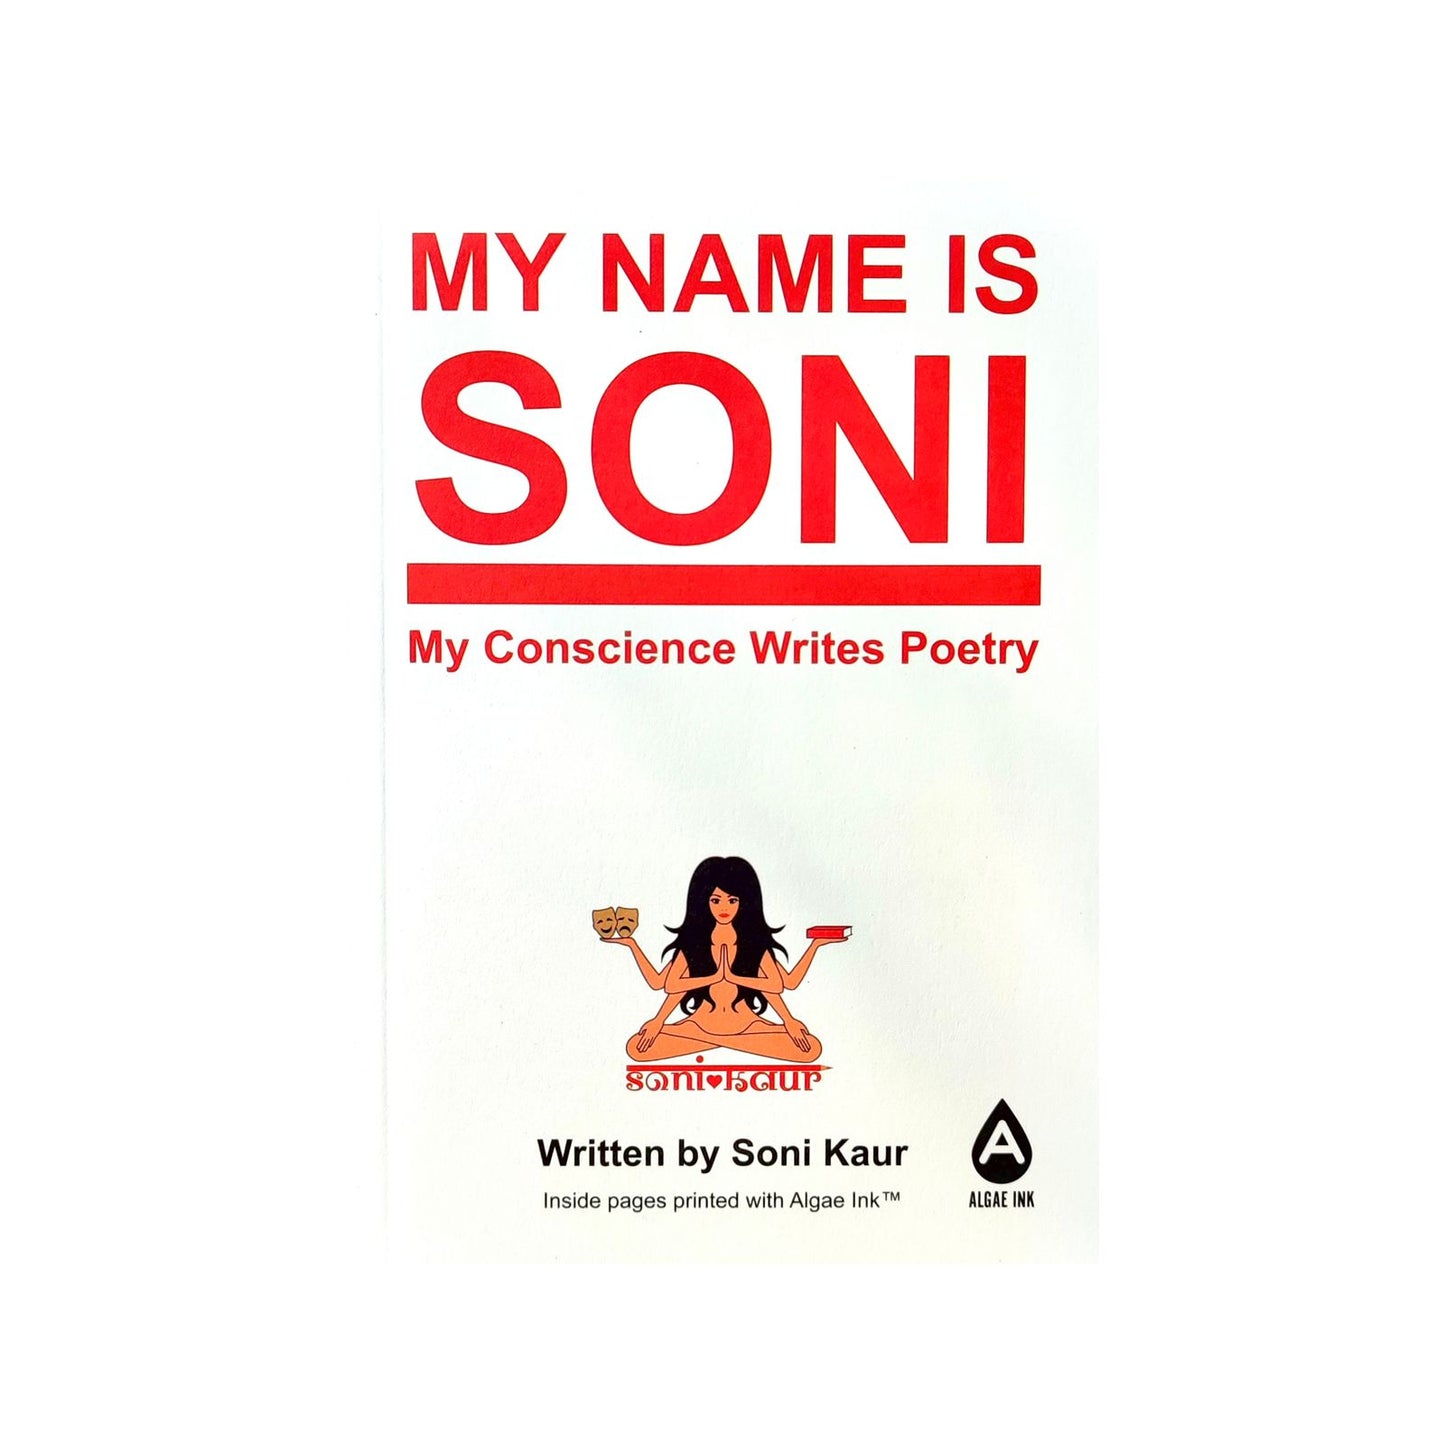 A white cover with red text: My name is Soni, my conscience writes poetry. Below centeret is a drawing of a woman figure with six arms, two hansd pressed together in front of her chest, two are holding drama masks and a book and the last two rest with th epalms outward on the knees.